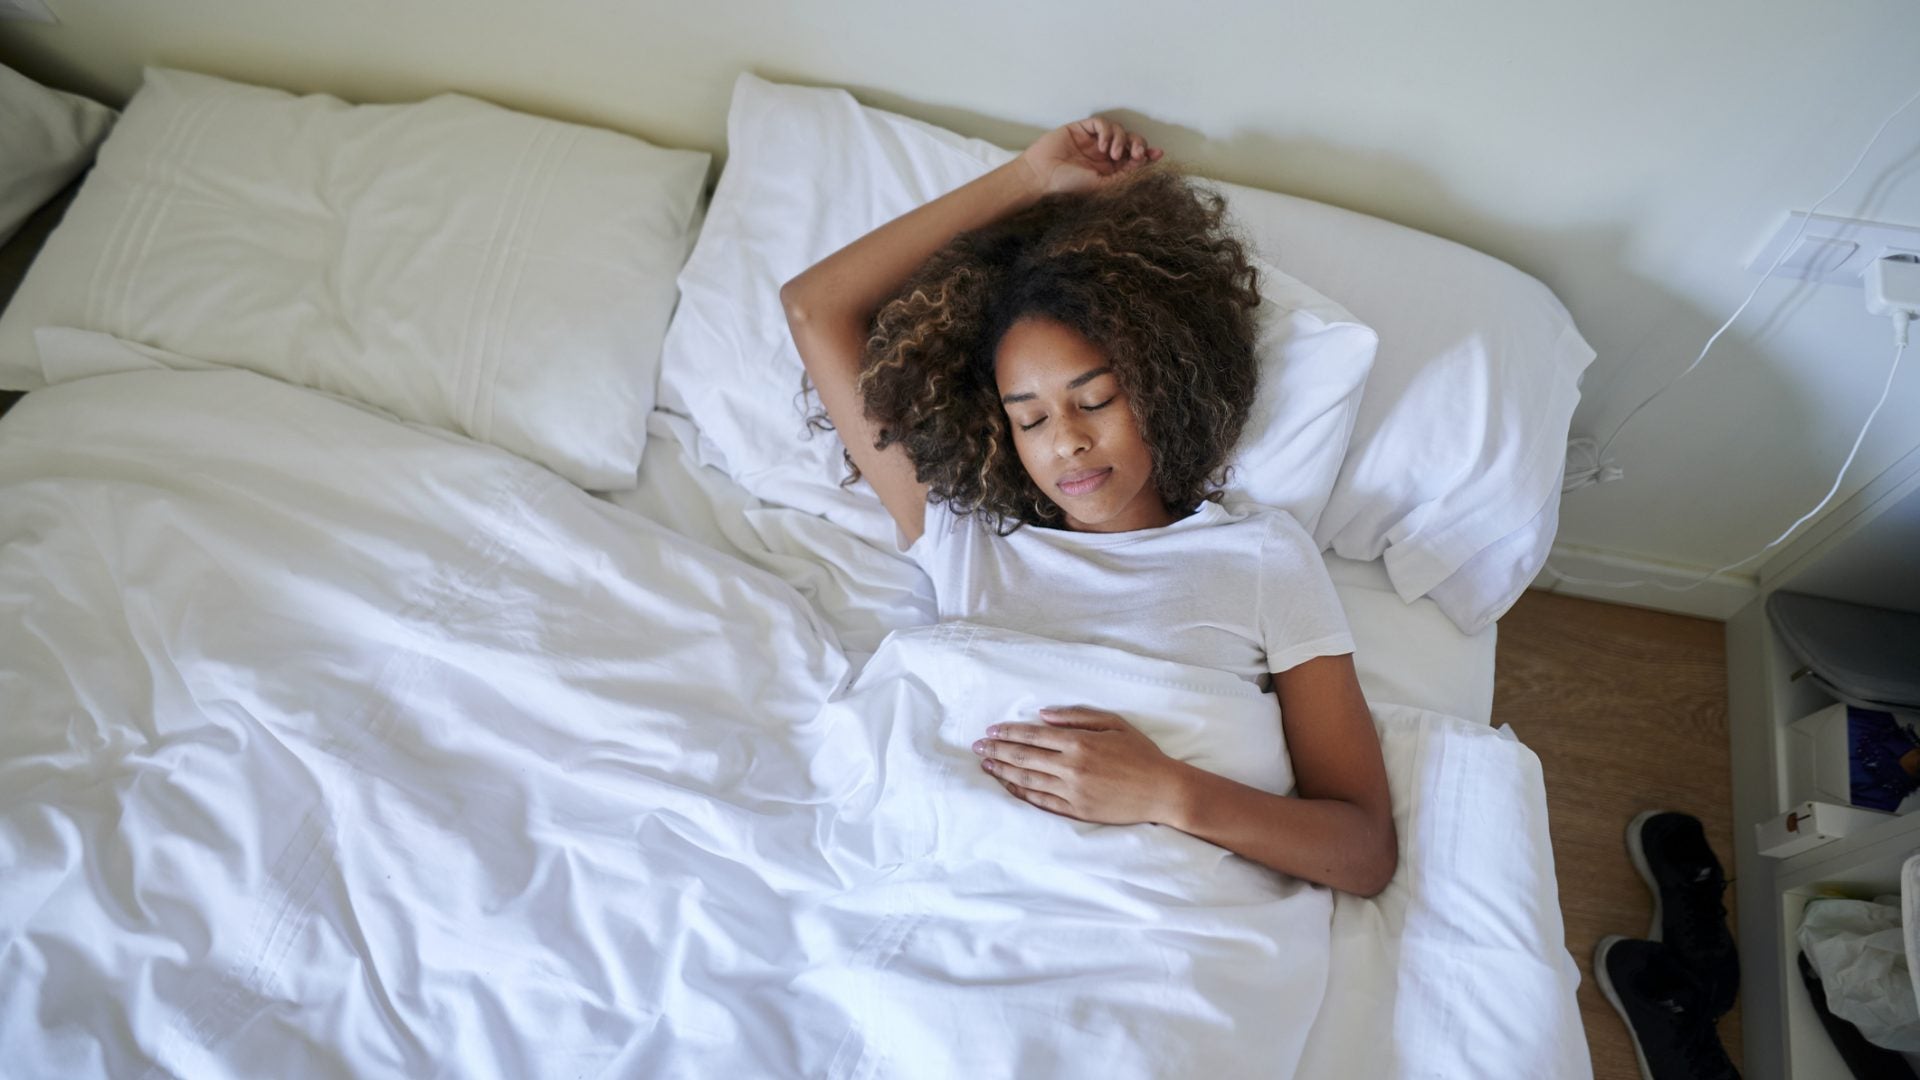 Money, Race And Location Highly Impact How Much We Sleep